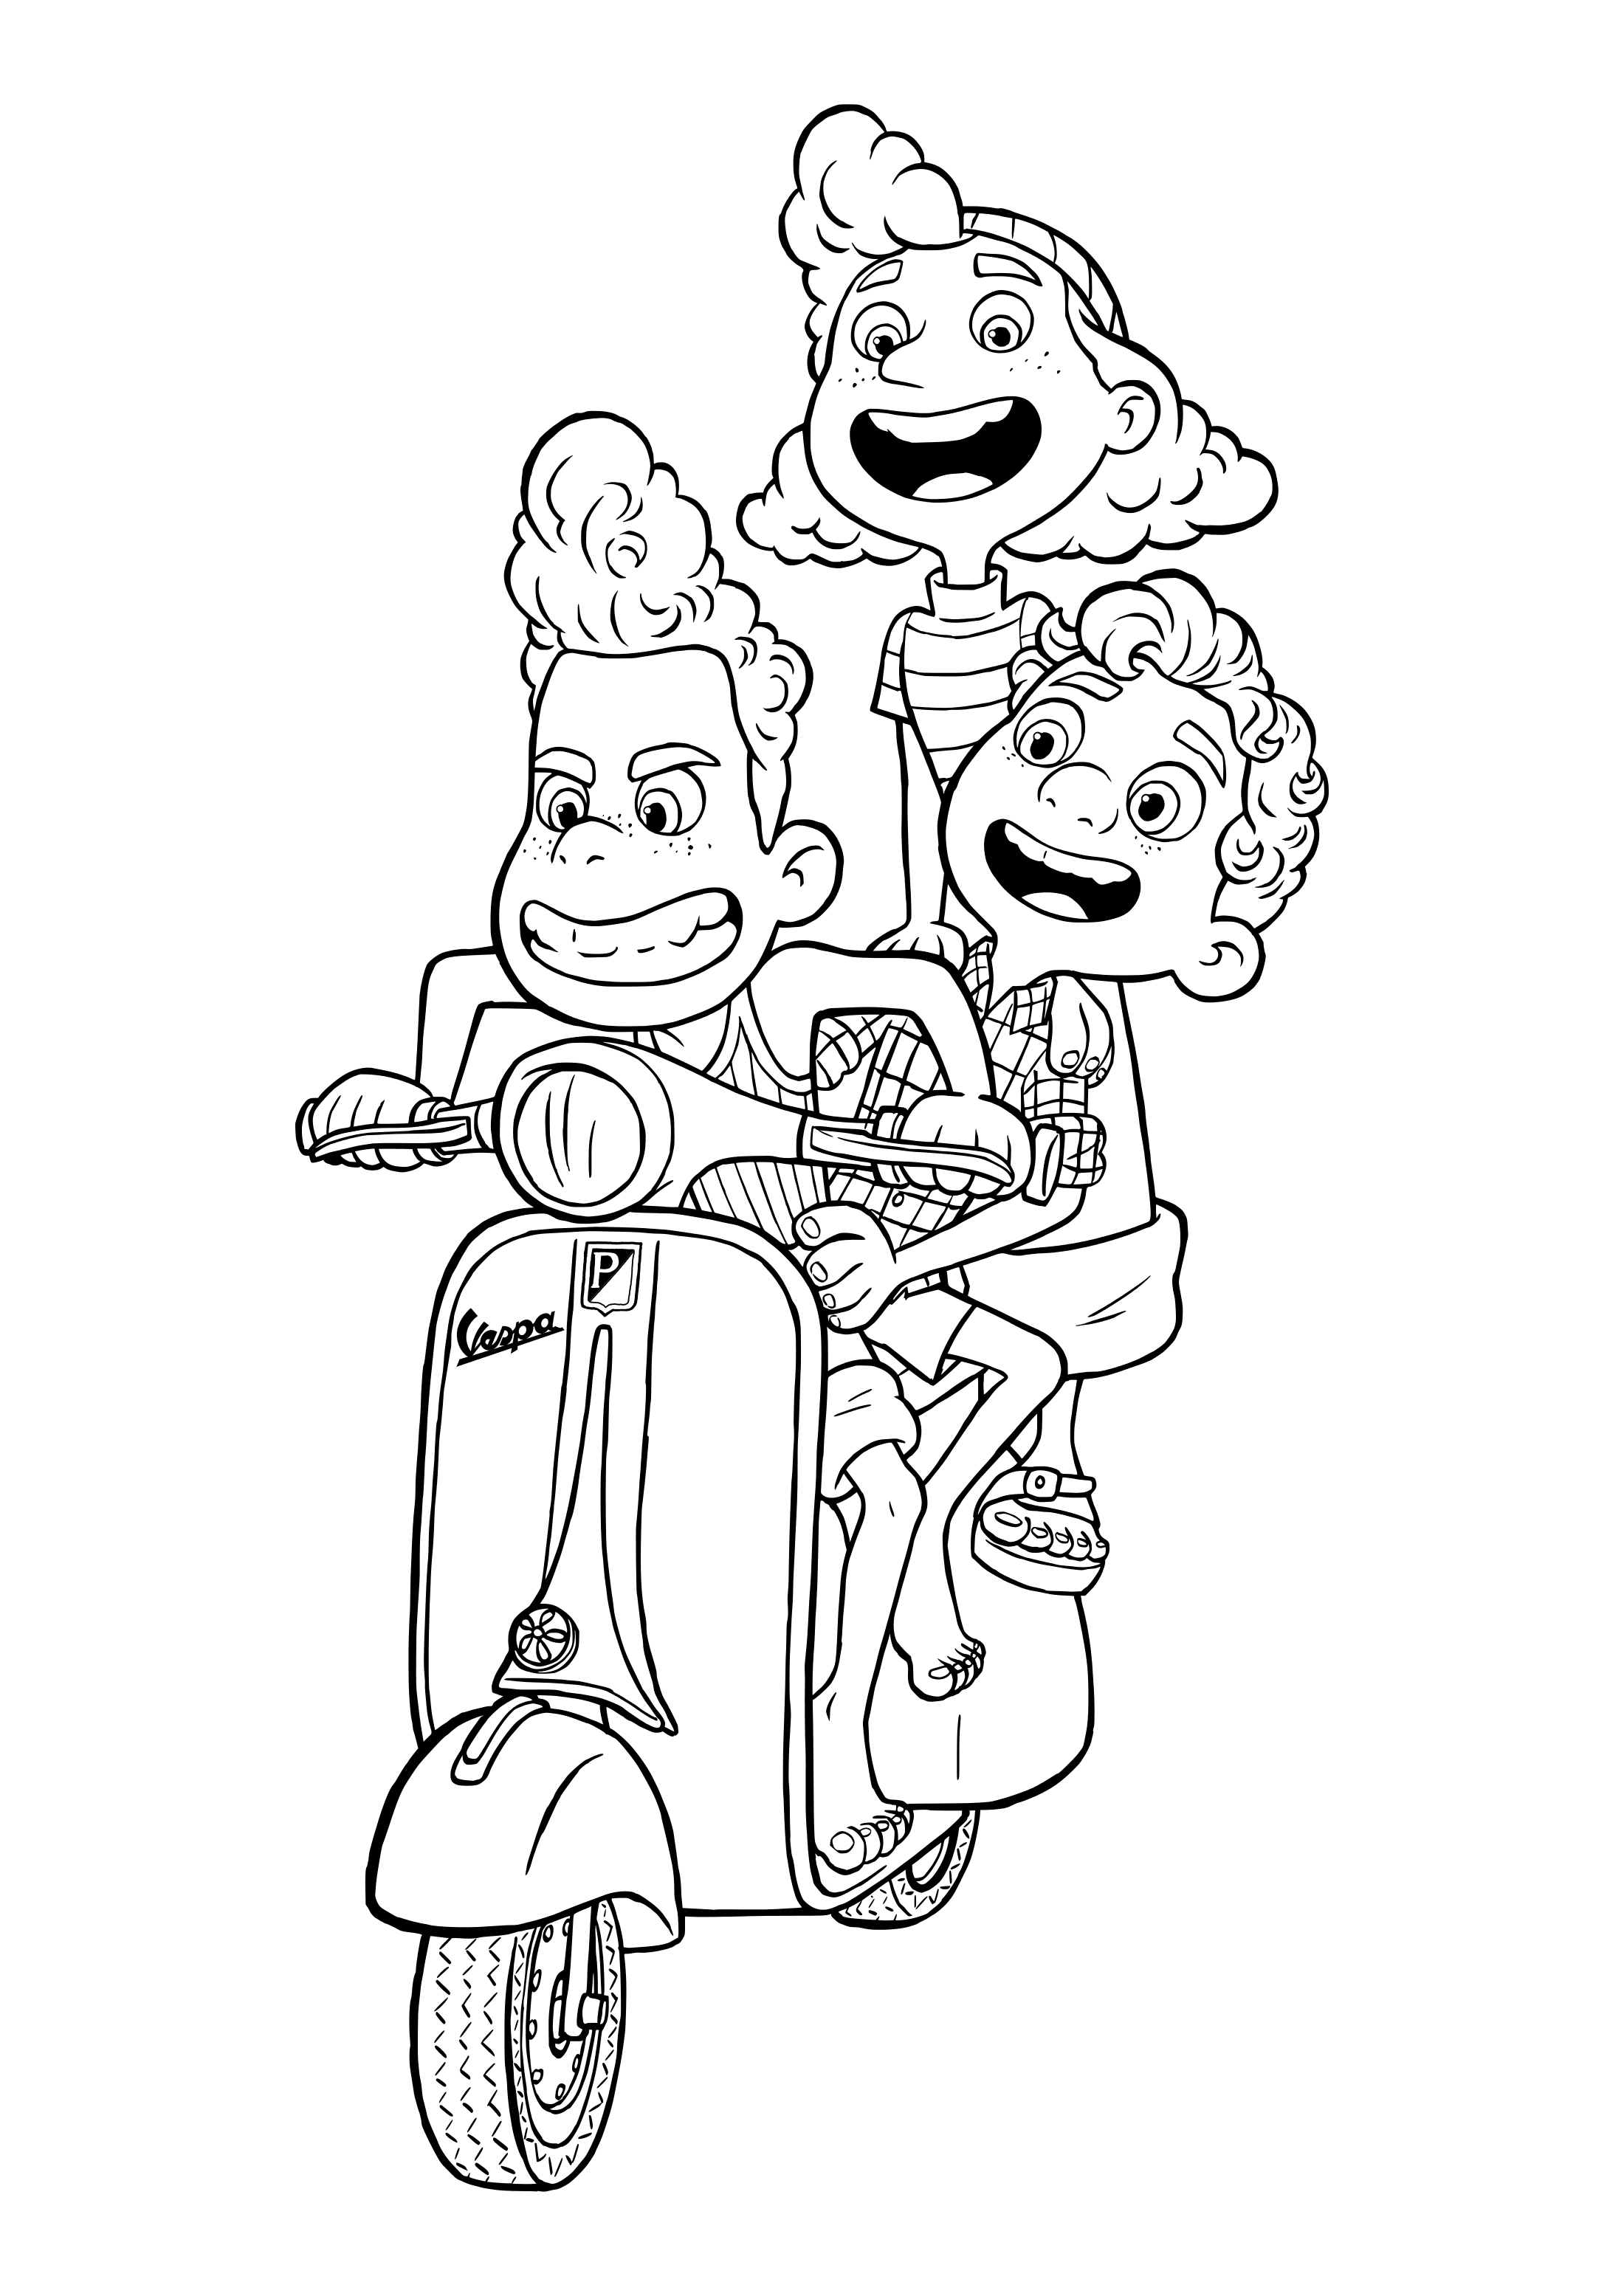 Coloring Pages cartoon Luca - Printable